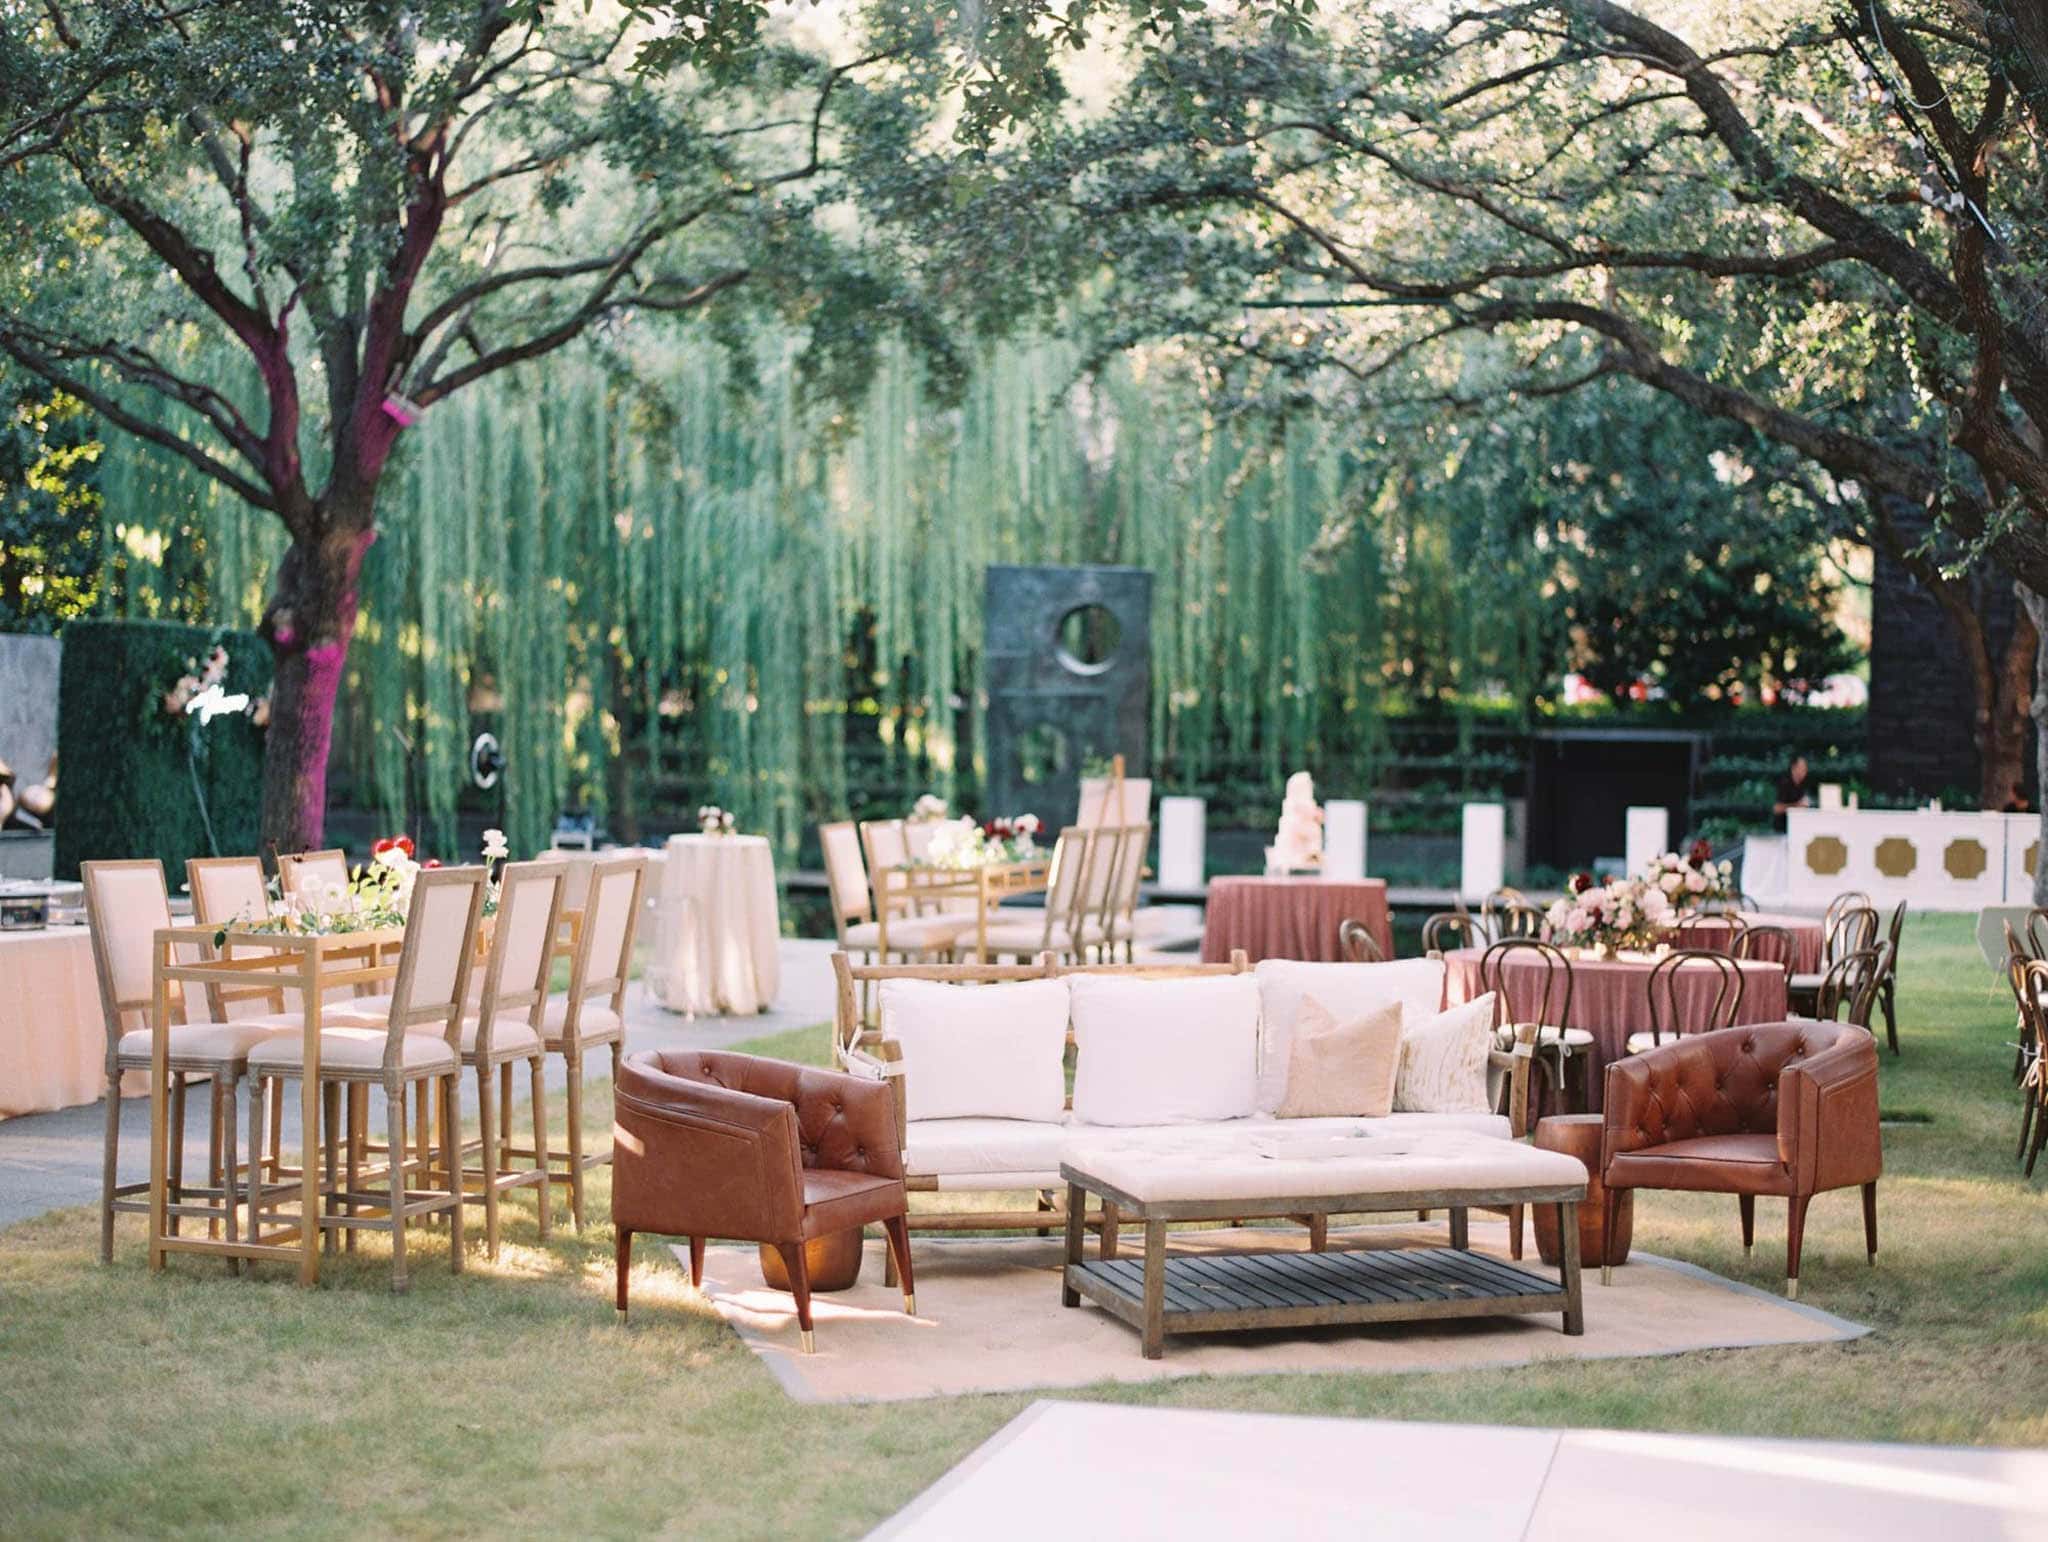 Spotlight on Seating: How to Create a Cohesive Lounge Area at Your Wedding or Event